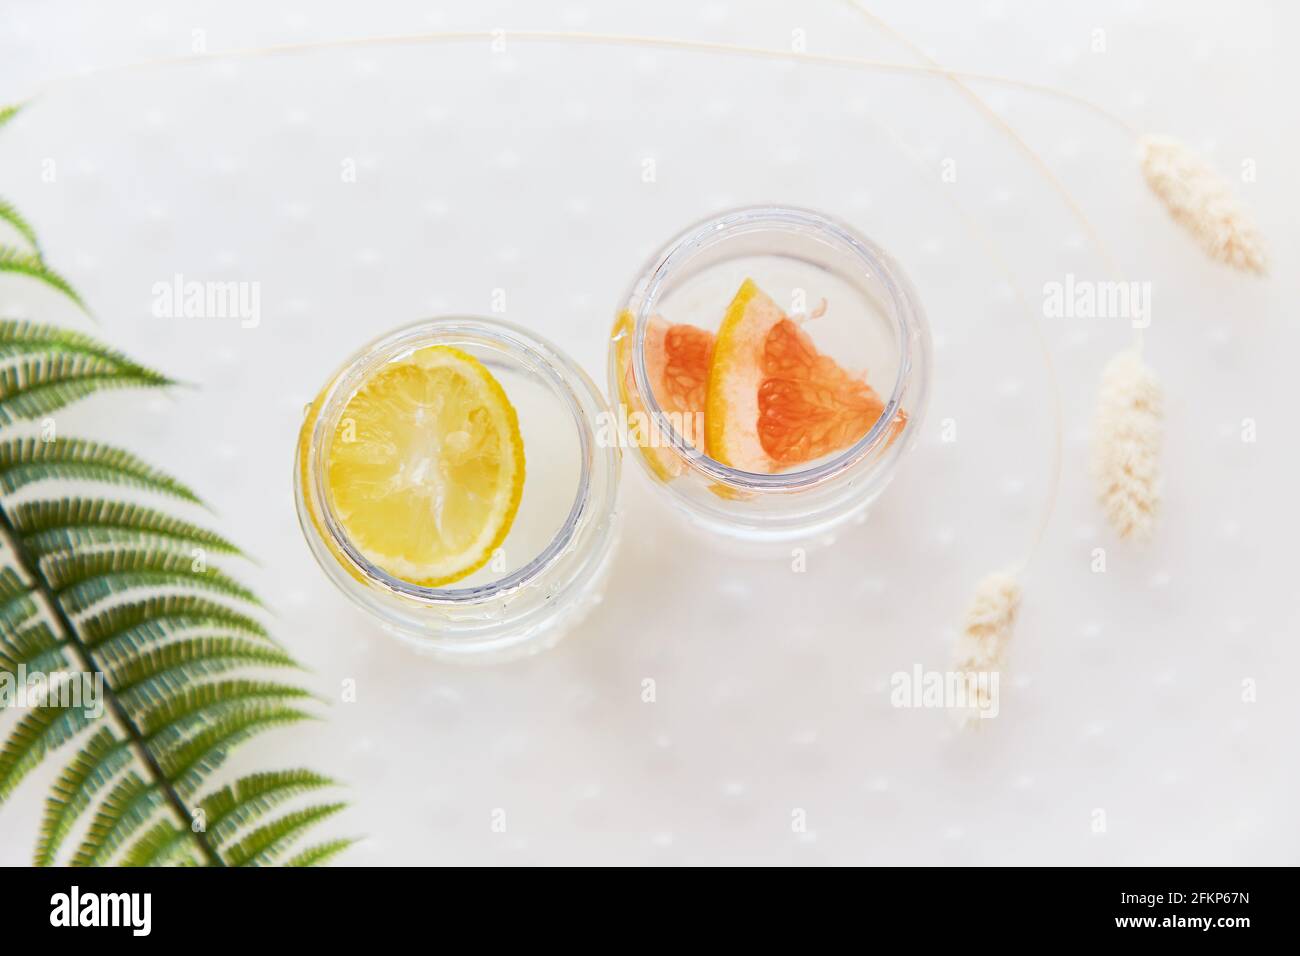 Handmade summer drinks with tropical flowers. Hard seltzer with lemon and grapefruit. Homemade summer cocktails concept on white background. High quality photo Stock Photo